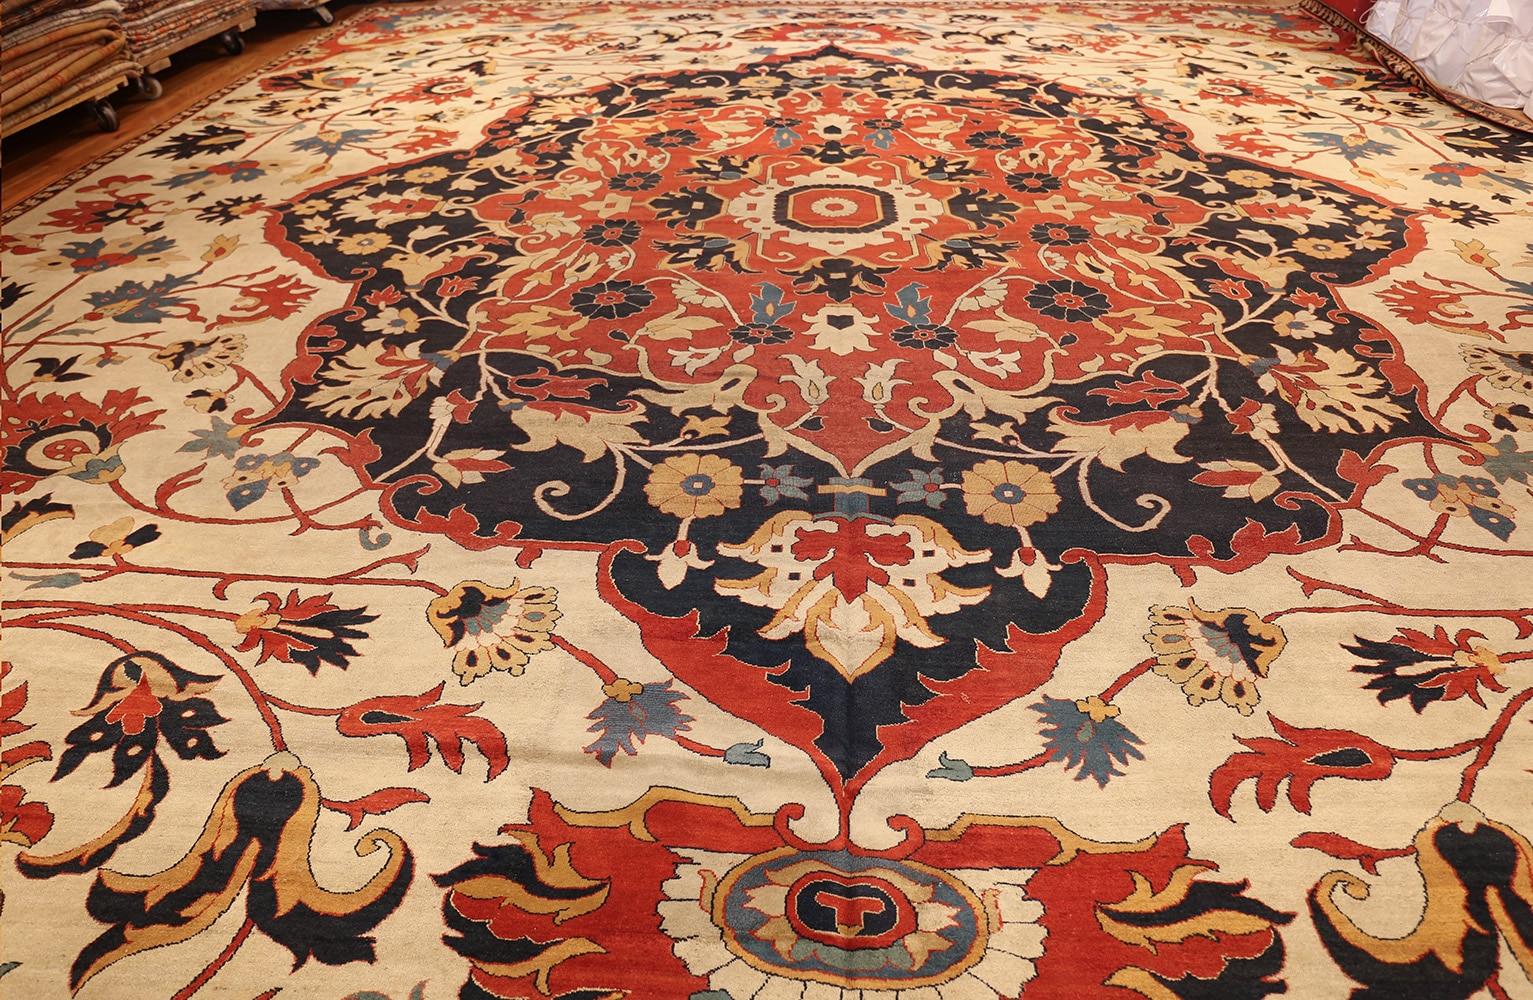 Hand-Knotted Nazmiyal Antique Persian Sarouk Farahan Carpet. Size: 19 ft 3 in x 23 ft 3 in